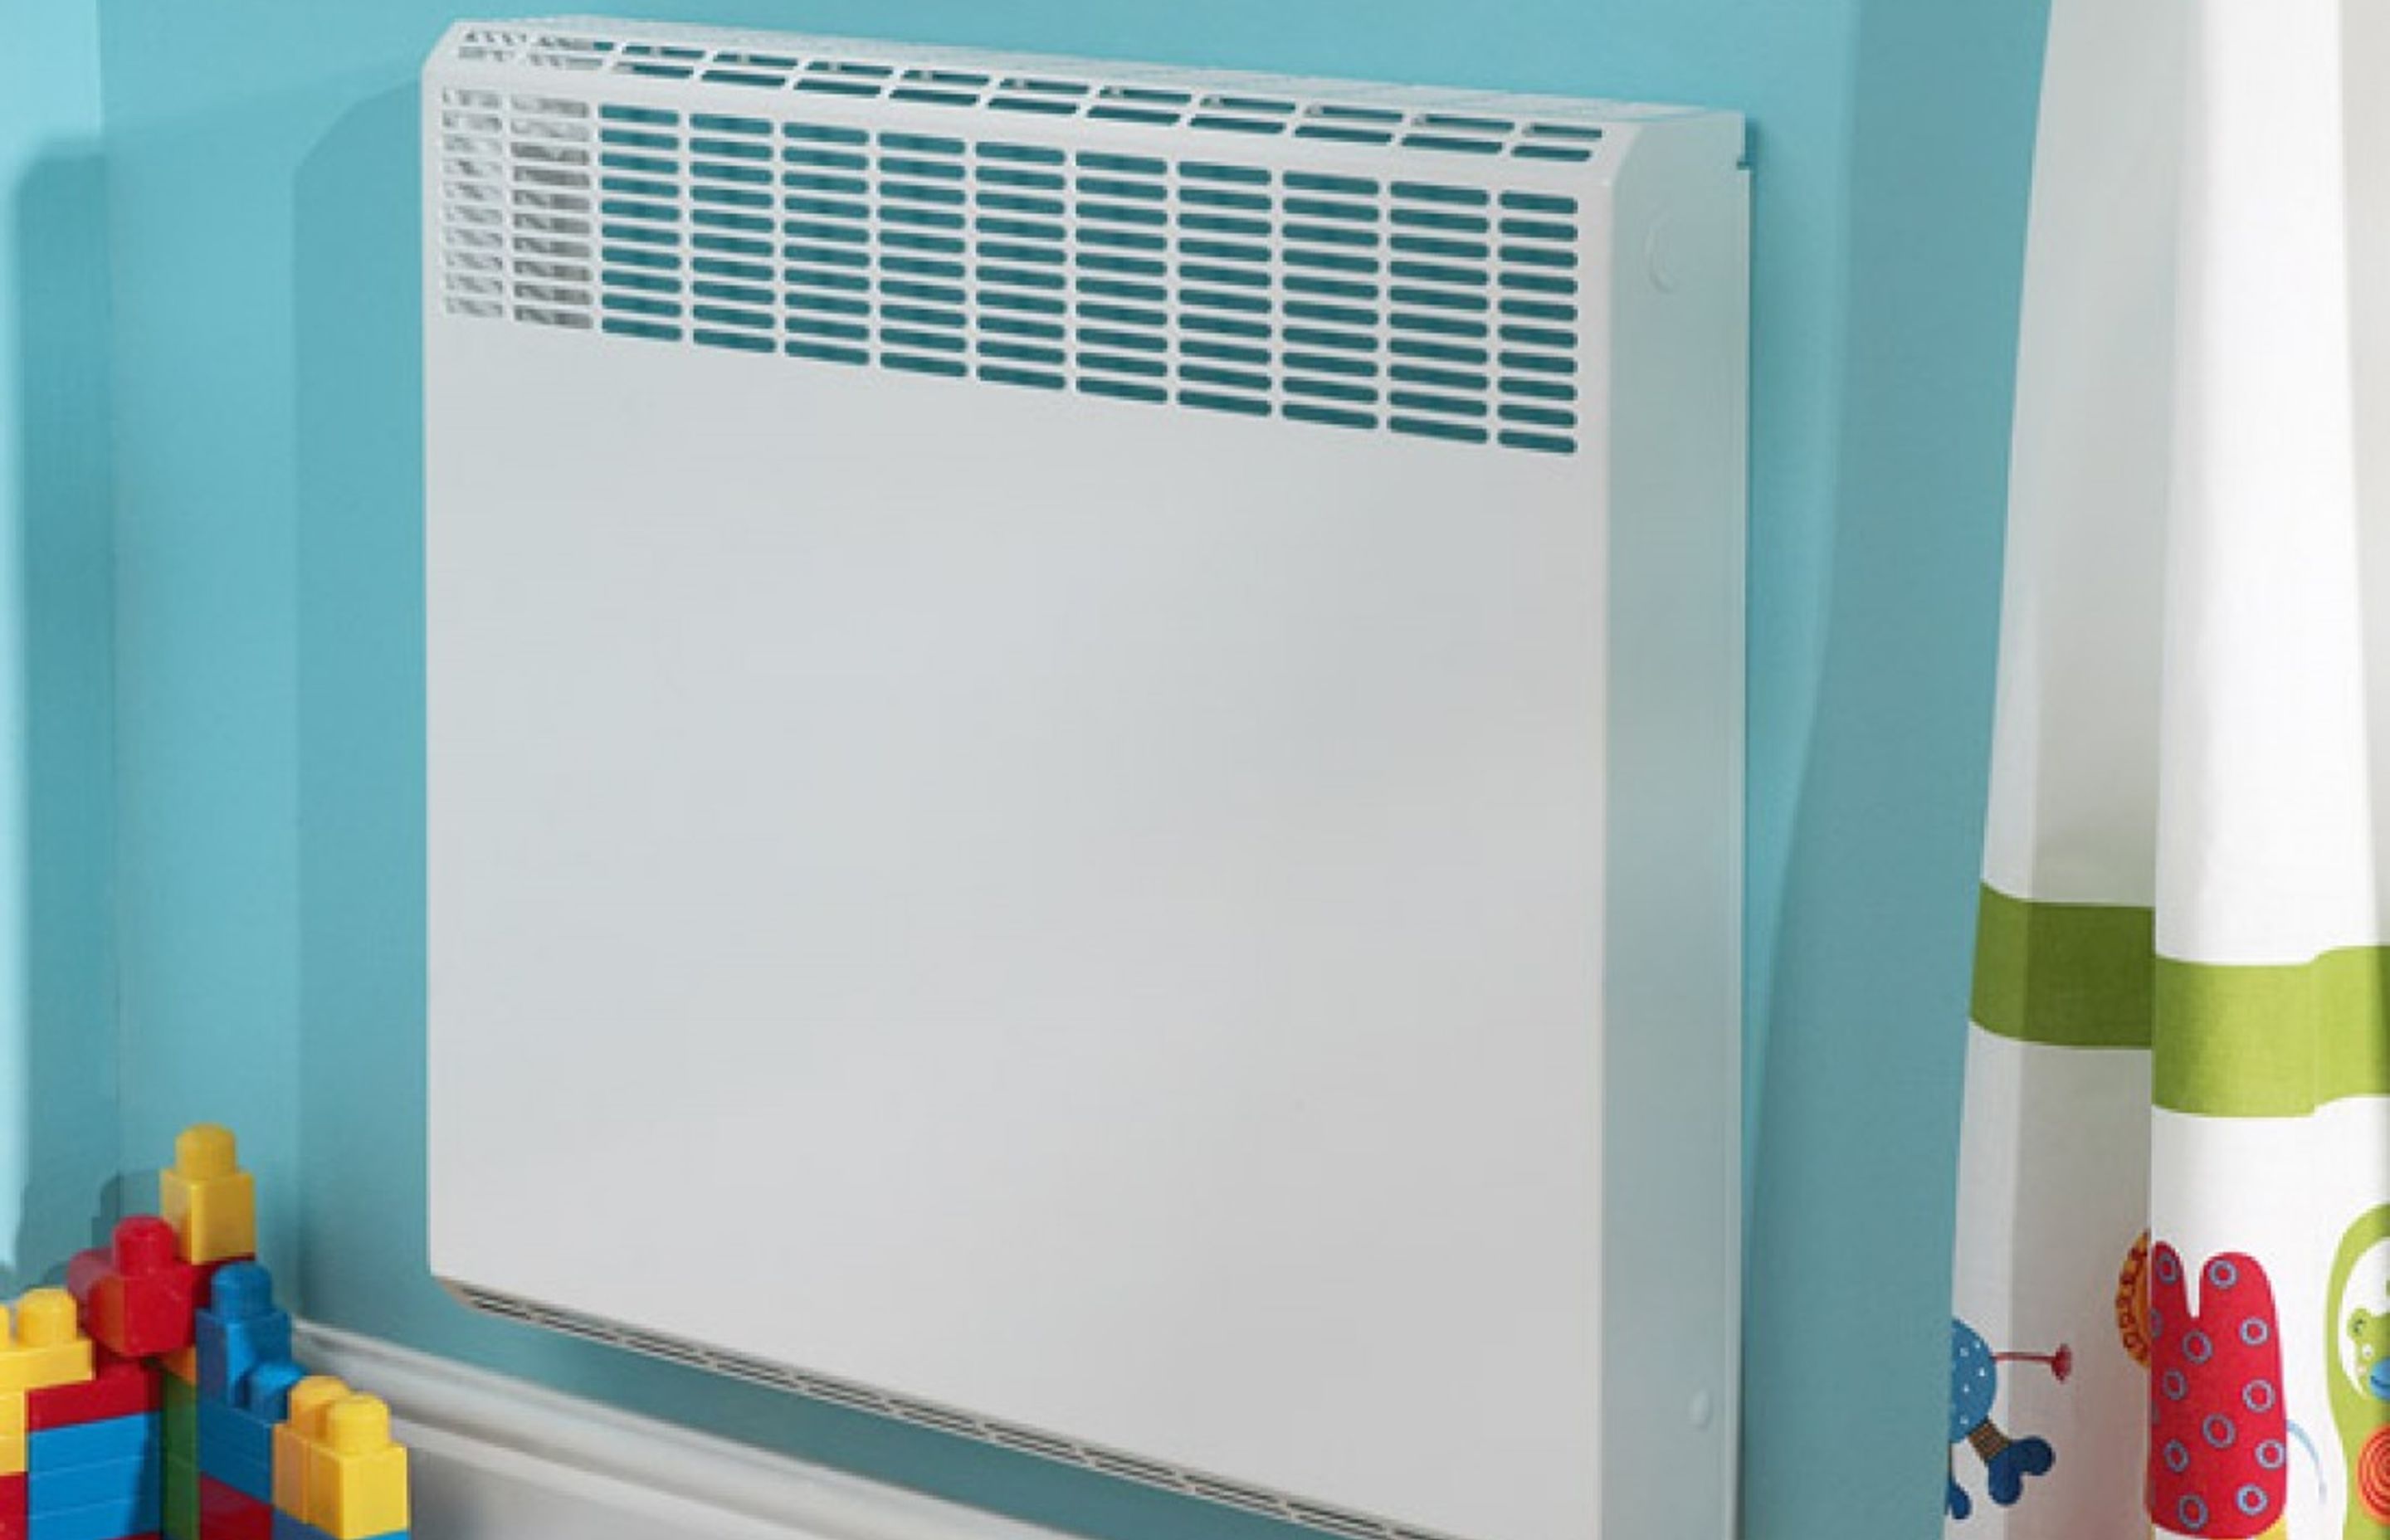 Low Surface Temperate (LST) radiators are available for child safety